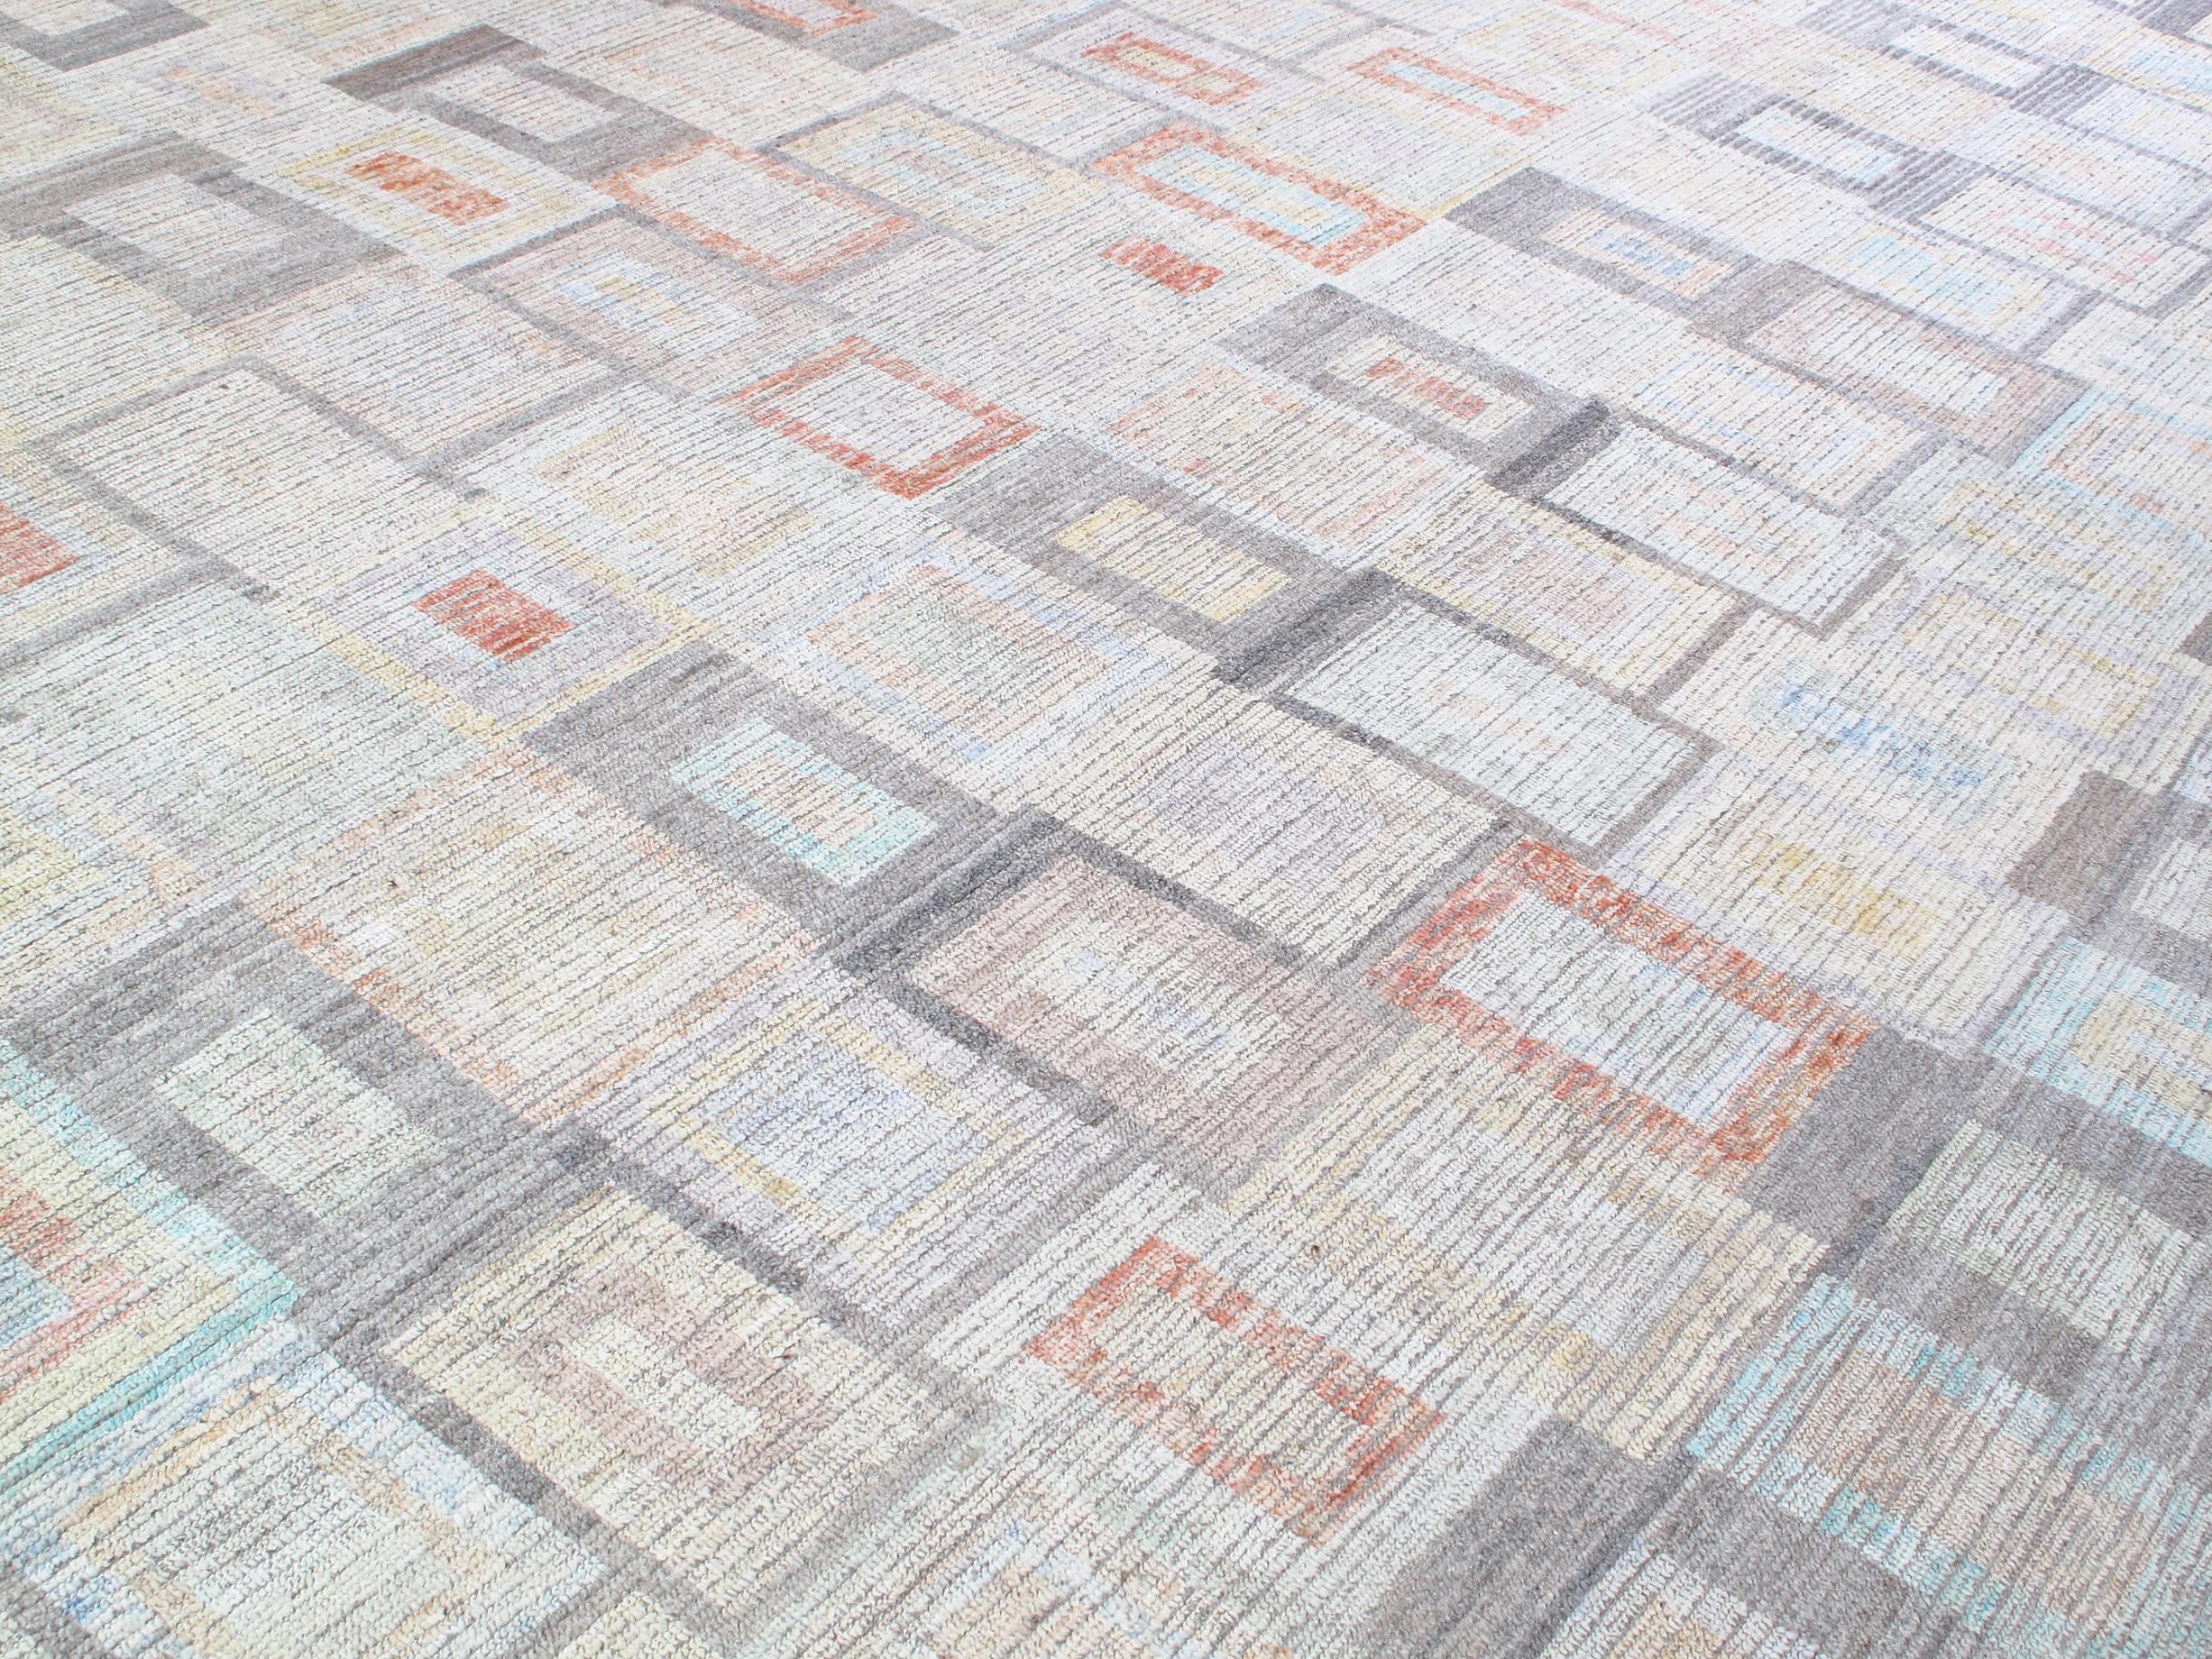 This modern, pastel rug is hand-knotted with 100% hand-spun wool. With the use of all natural vegetable dyes, we have created the perfect soft-hued palette to brighten up any room. Custom sizes and colors available.